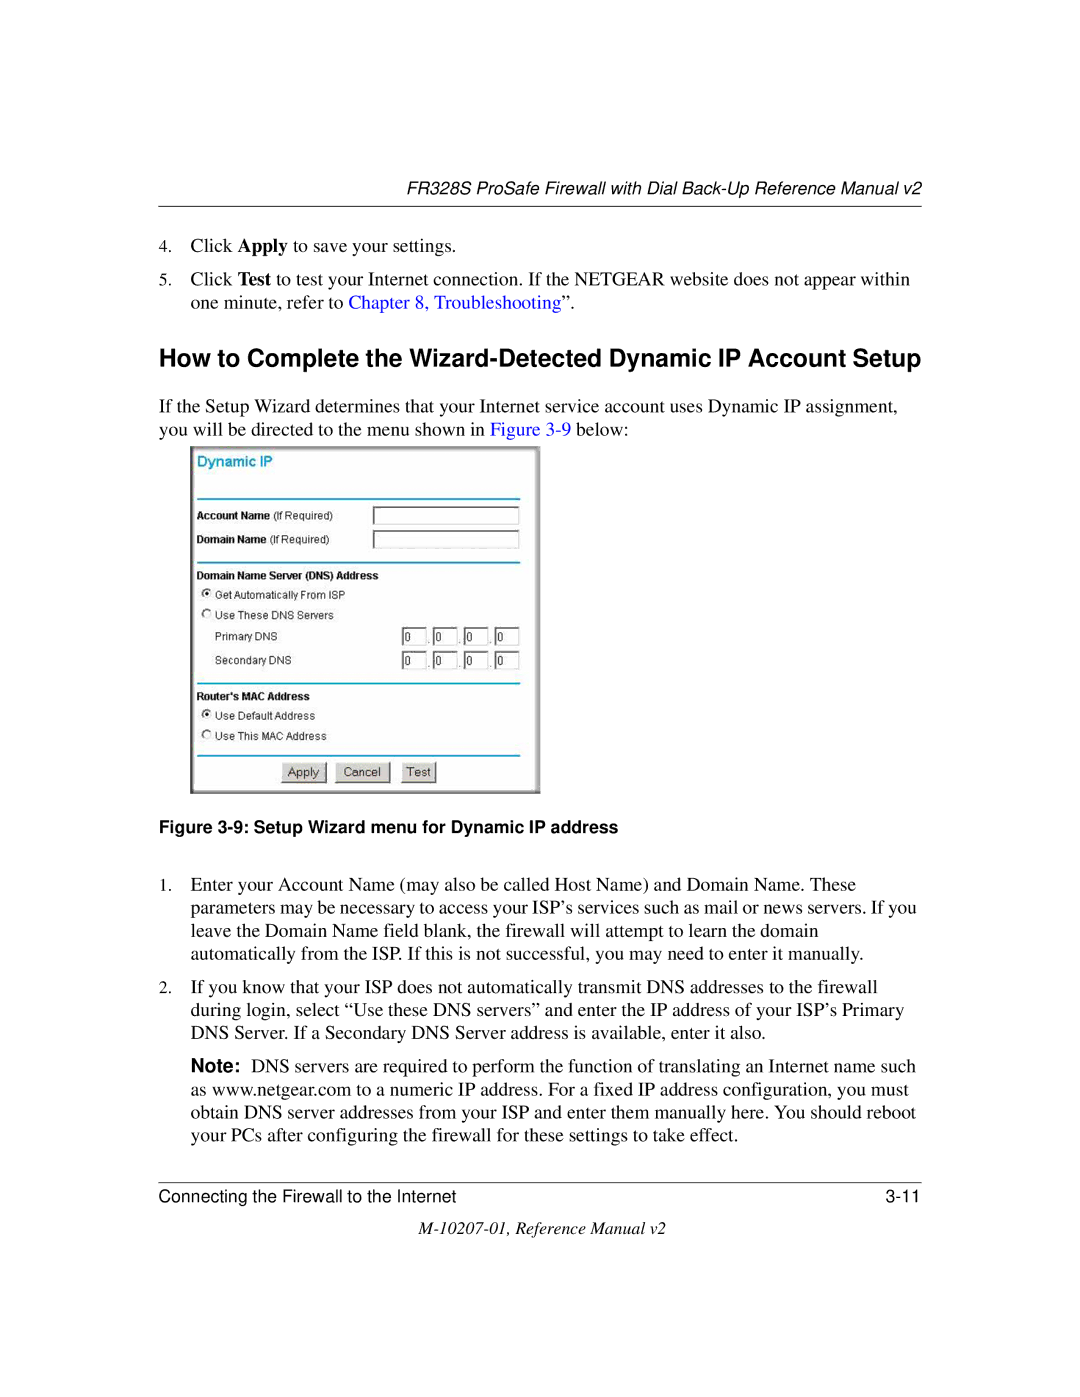 NETGEAR FR328S manual How to Complete the Wizard-Detected Dynamic IP Account Setup 